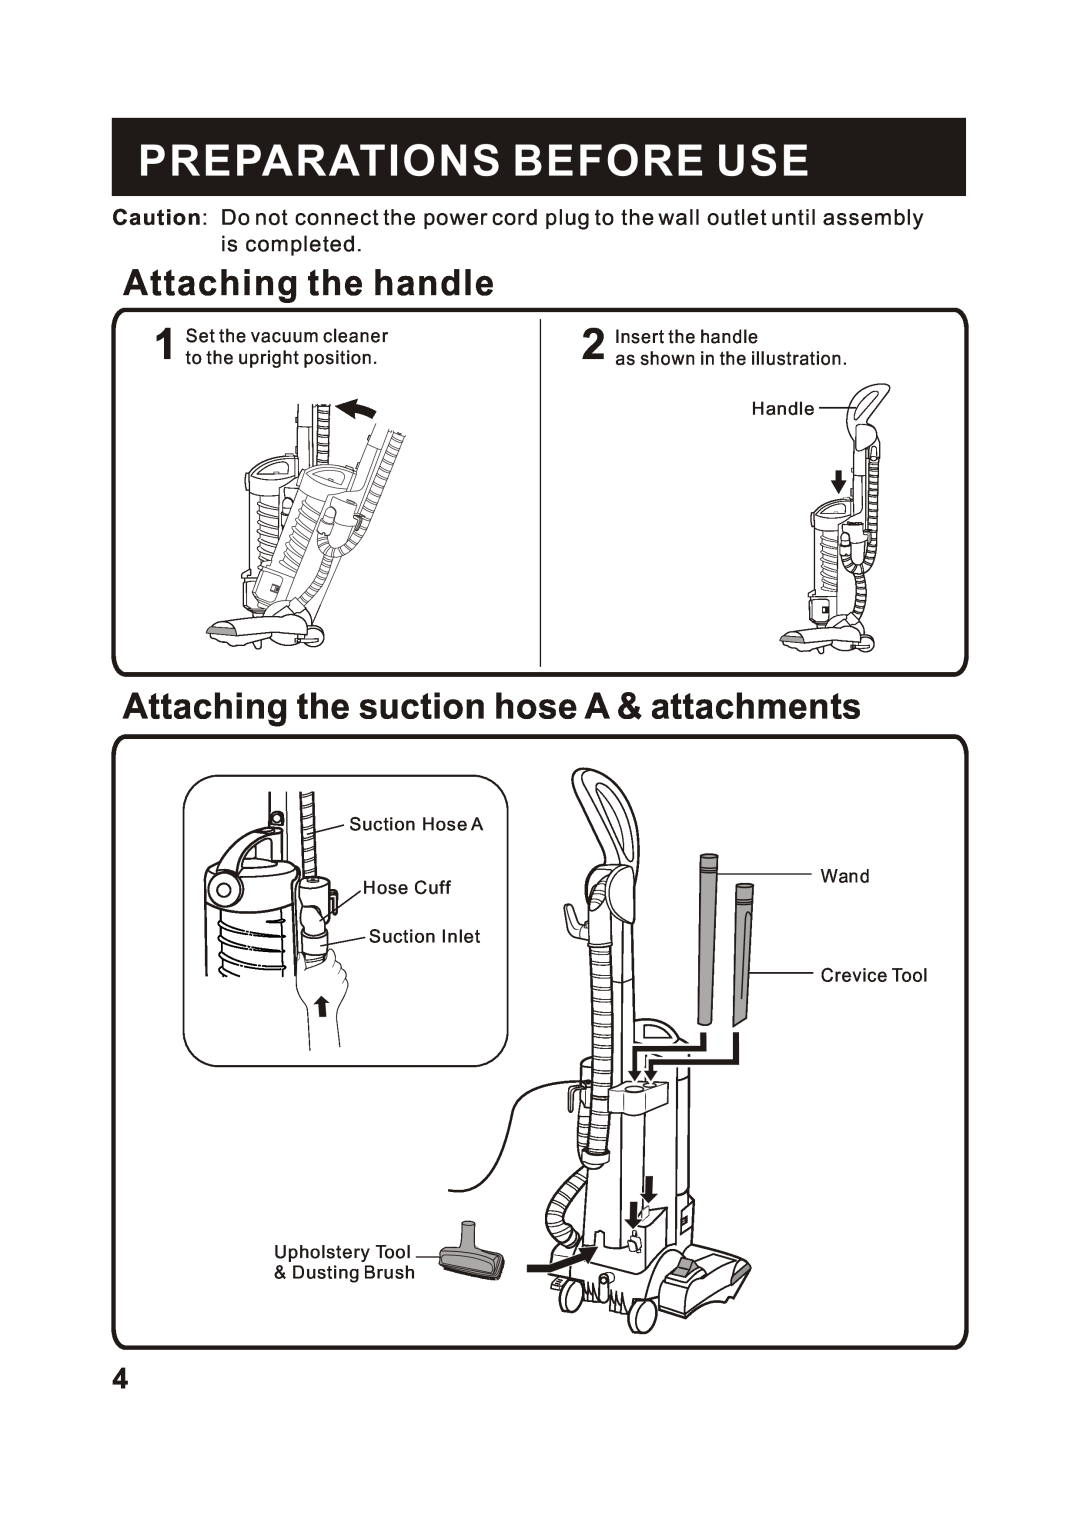 Fantom Vacuum FM742CS Preparations Before Use, Attaching the handle, Attaching the suction hose A & attachments 